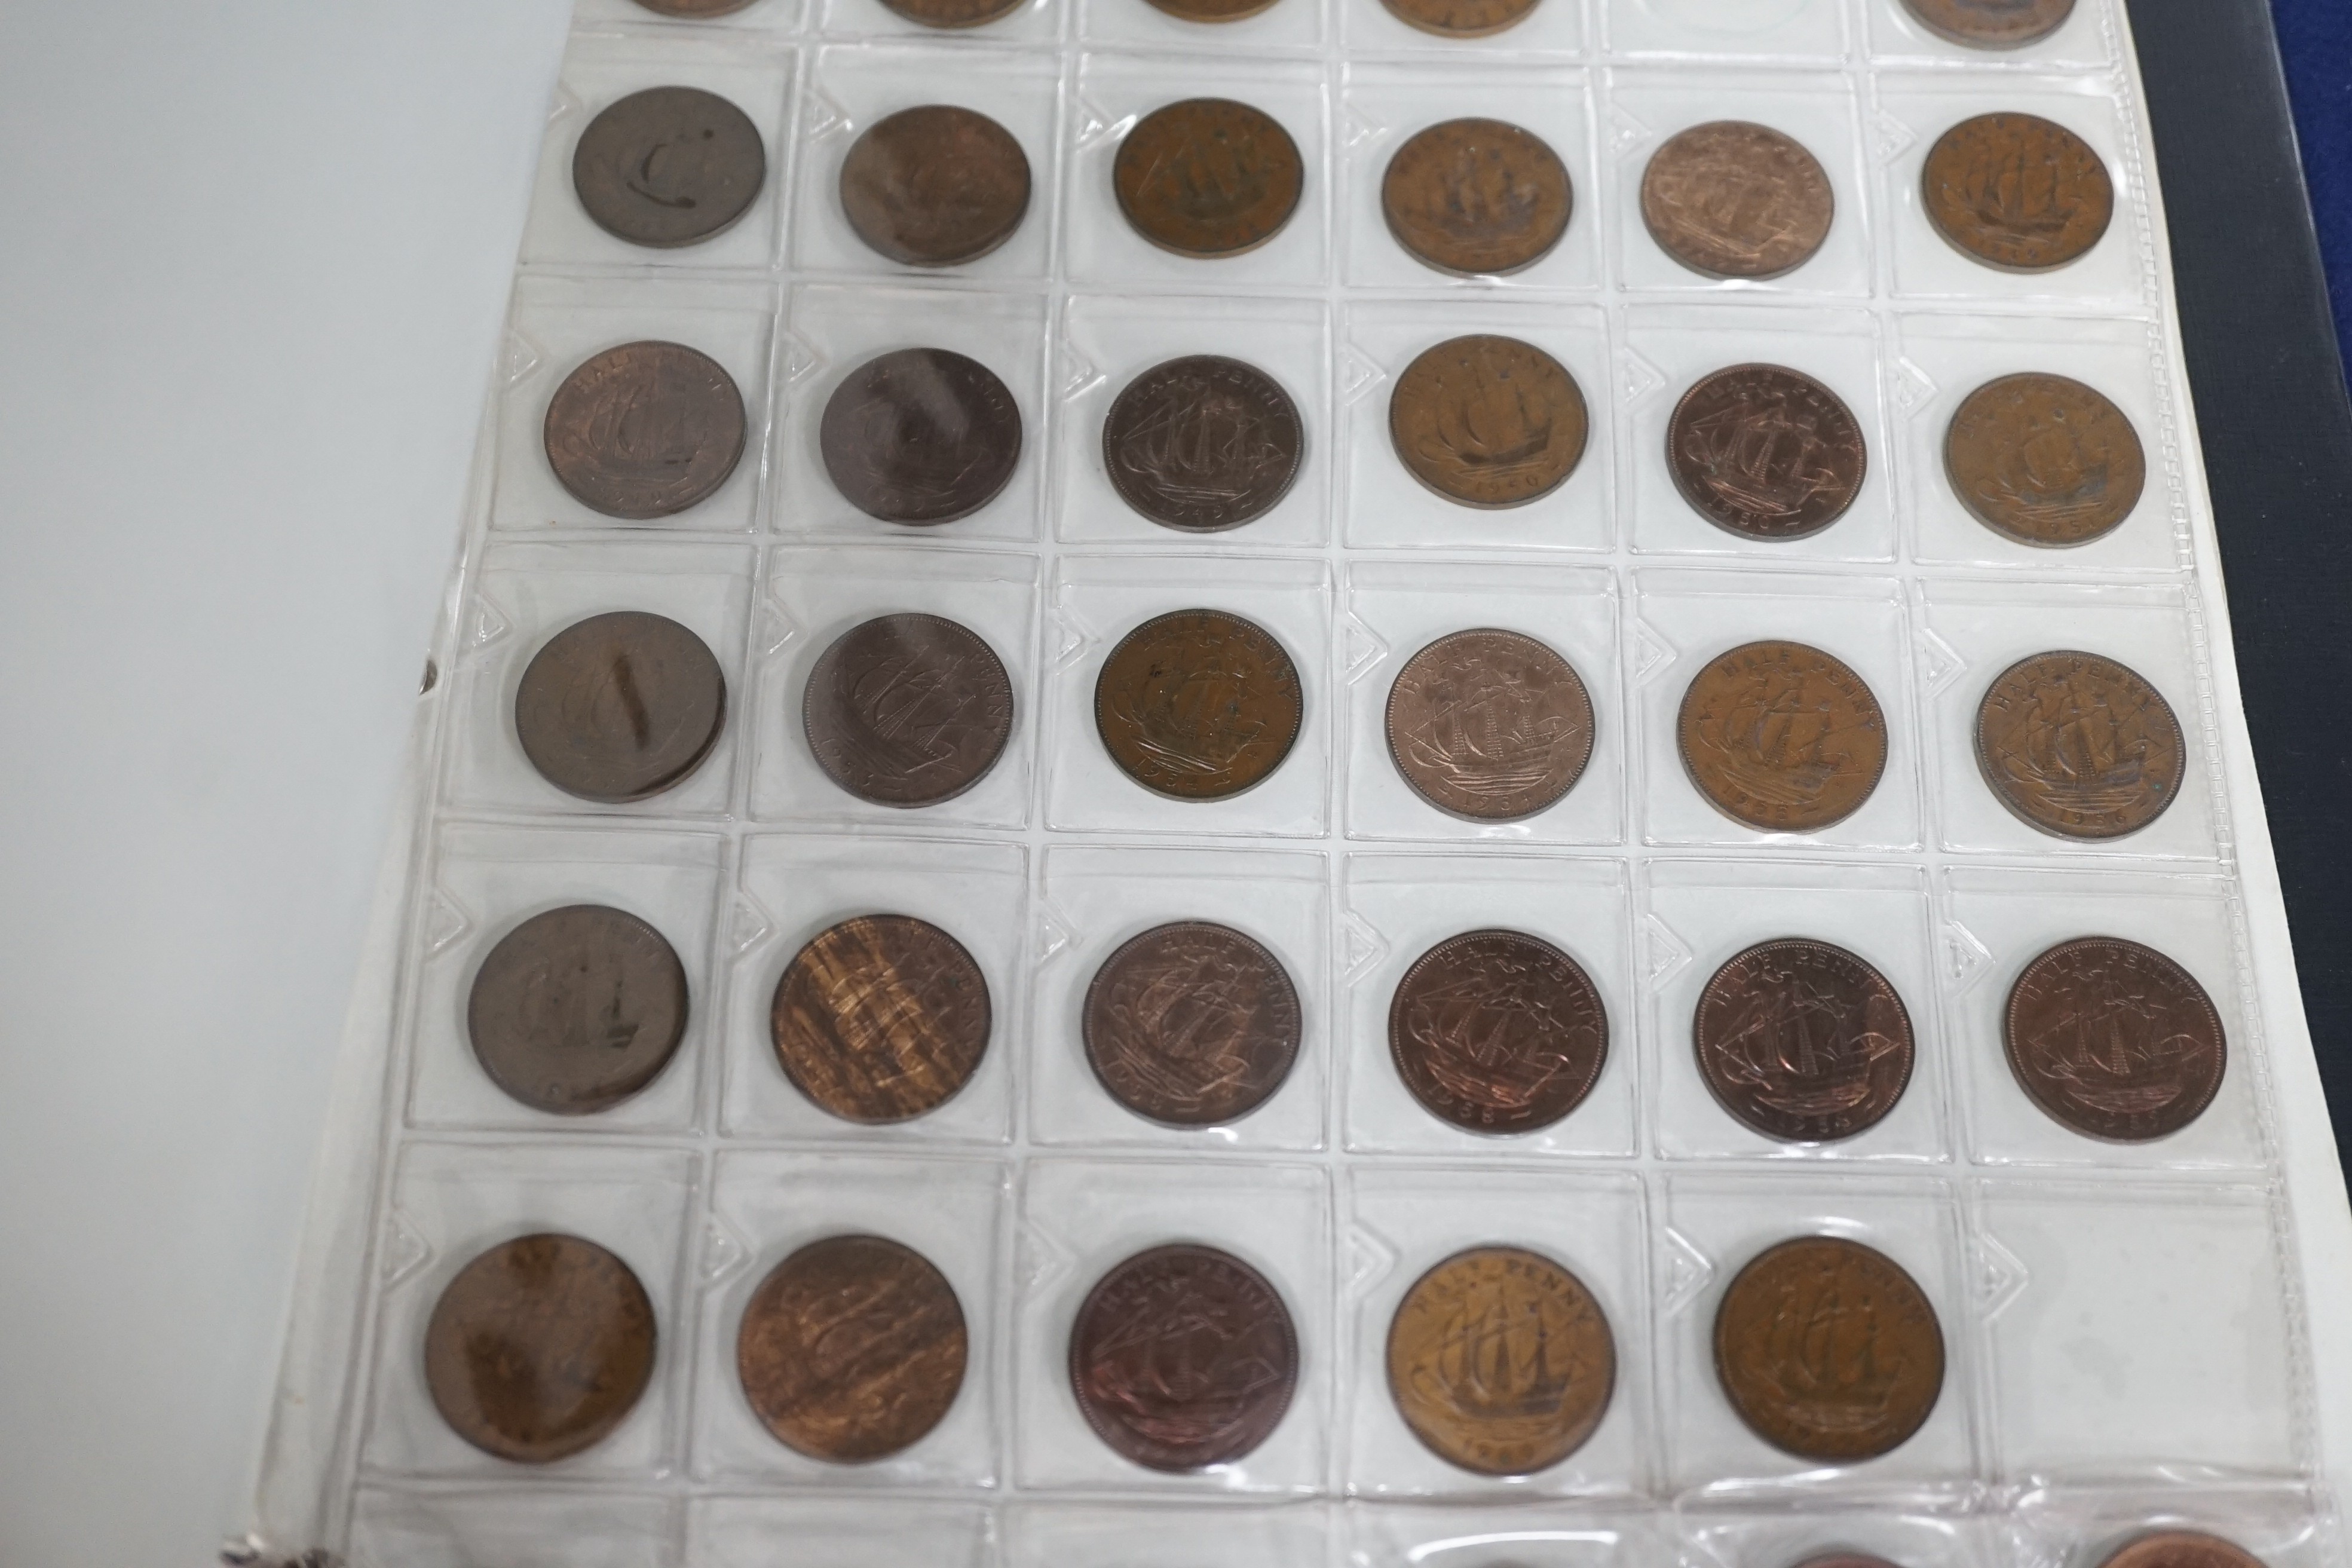 An album of British half pennies and farthings, Charles II to QEII, half pennies include 1730 F, 1806 UNC, 1827 GVD, 1877 lustrous UNC, Farthings including 1788 VF, 1799 EF, 1821 EF and decimal pennies